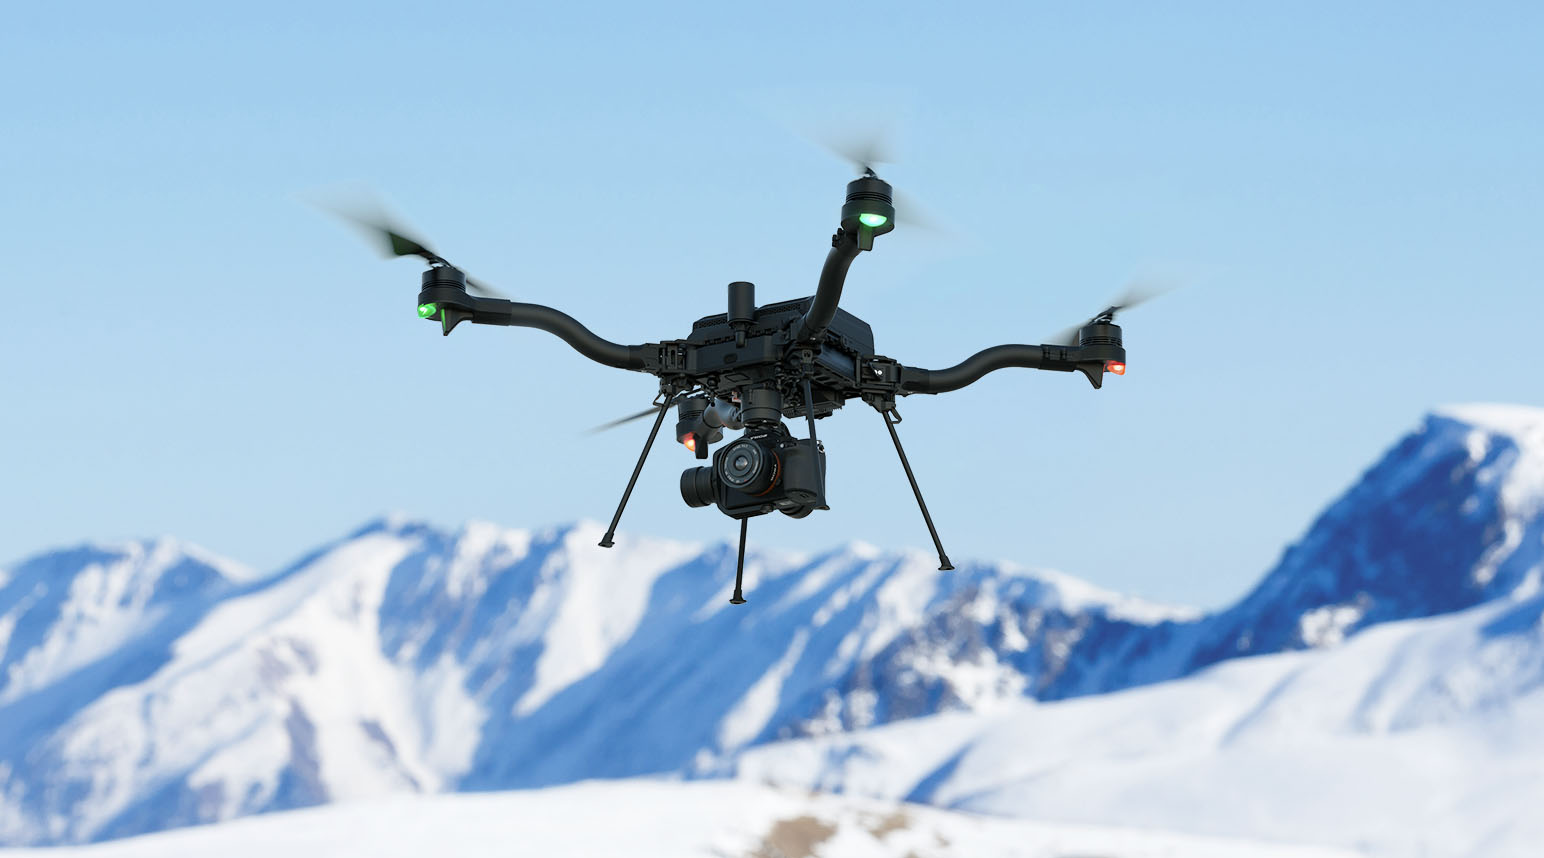 A white drone flies in a clear blue sky over snowy mountains